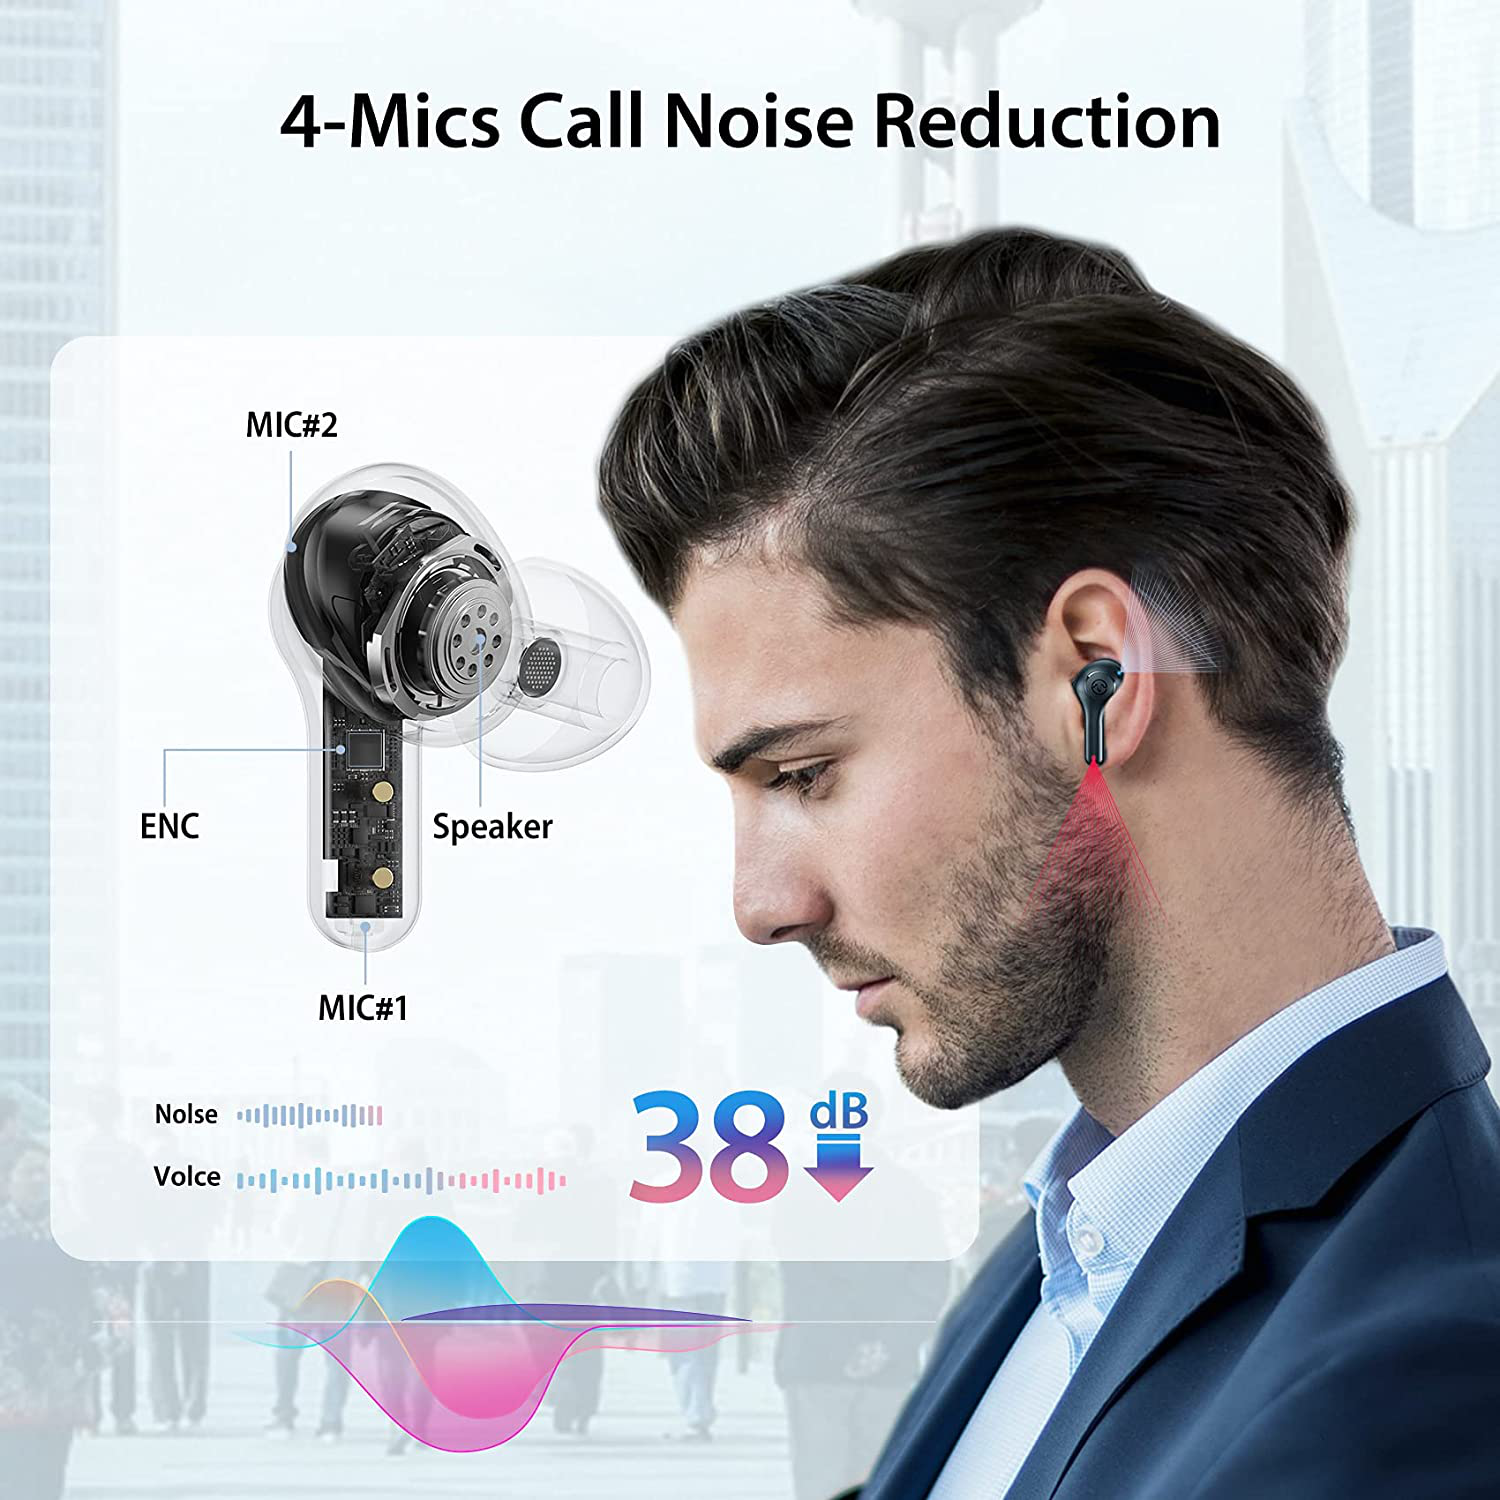 VEATOOL 4-Mics Call Noise Reduction Wireless Earbuds,Bluetooth Headphones Support Wireless Charging Case, Waterproof Stereo Earphones with Microphone, Touch Control Headset with USB-C for Android iOS